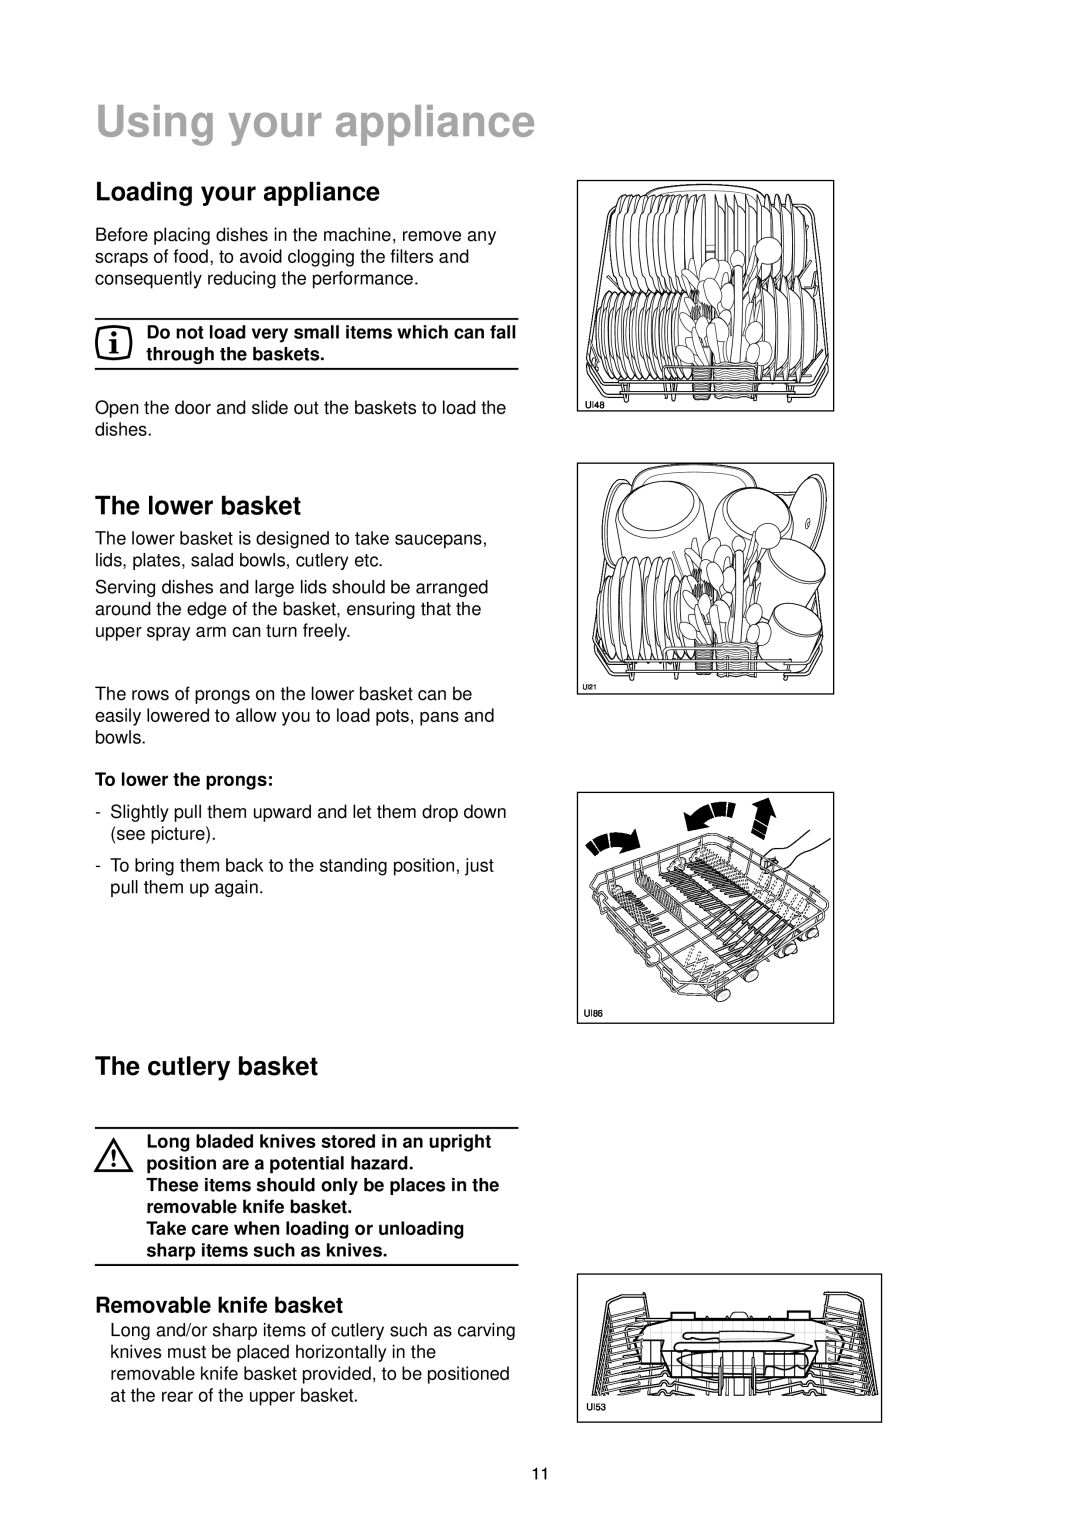 Zanussi DE 6844 A Using your appliance, Loading your appliance, The lower basket, The cutlery basket, To lower the prongs 